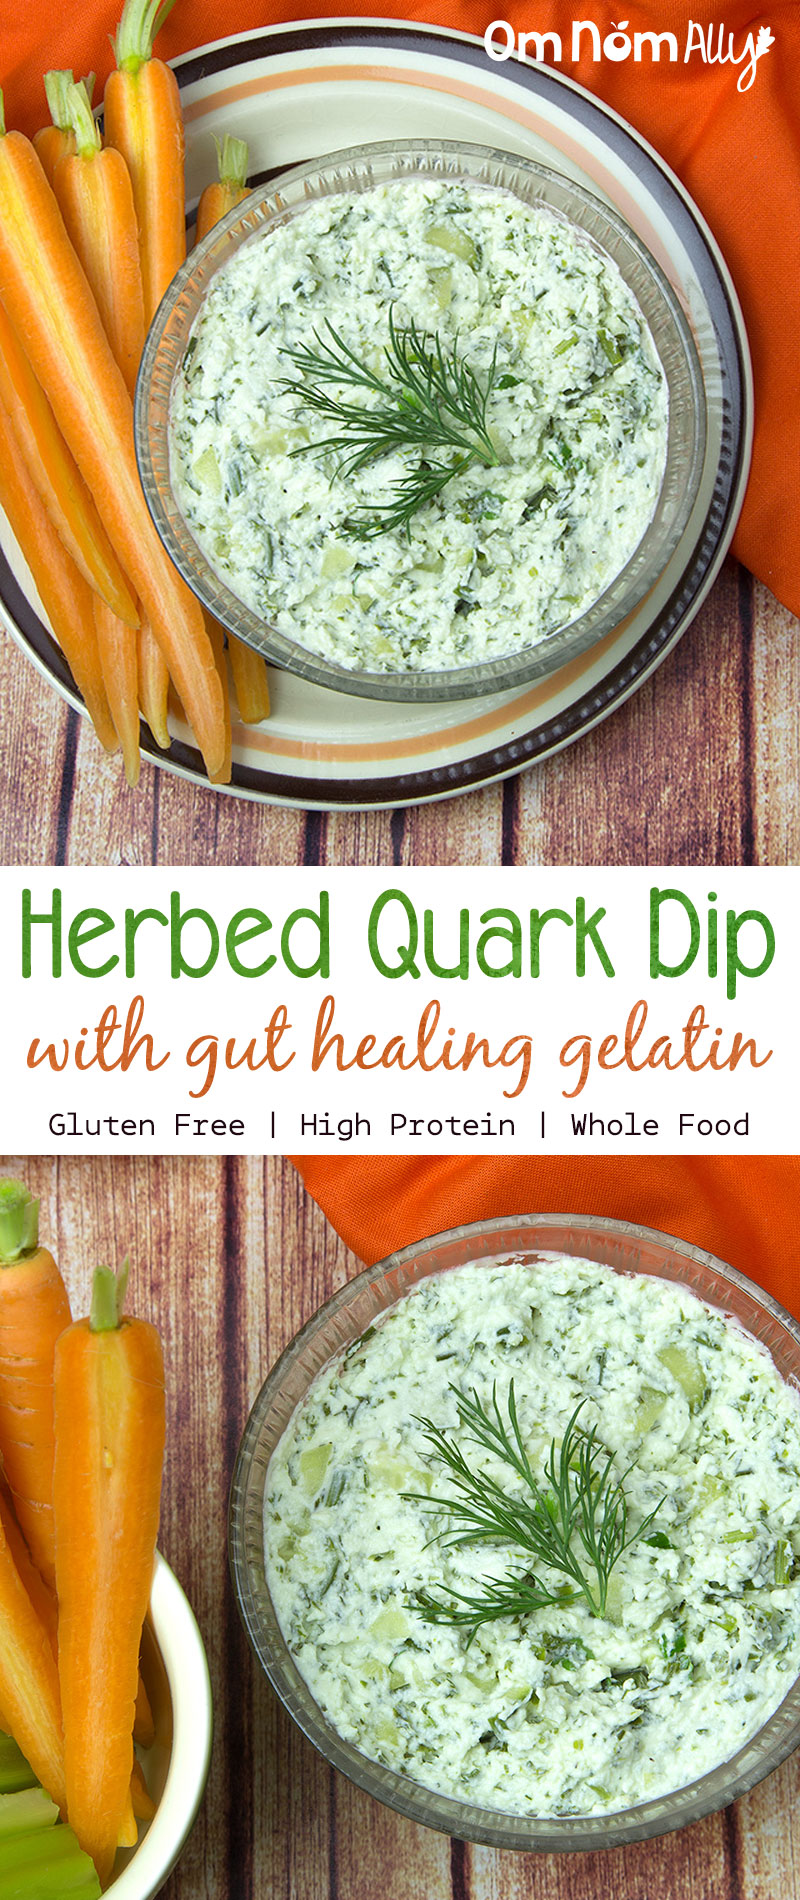 Herbed Quark Dip with Gut Healing Gelatin @OmNomAlly | It's the potent mix of chives, dill and parsley that keeps people coming back for more of this dip. After combining this quark dip with gelatin and allowing it to set it transforms into something truly magnificent!